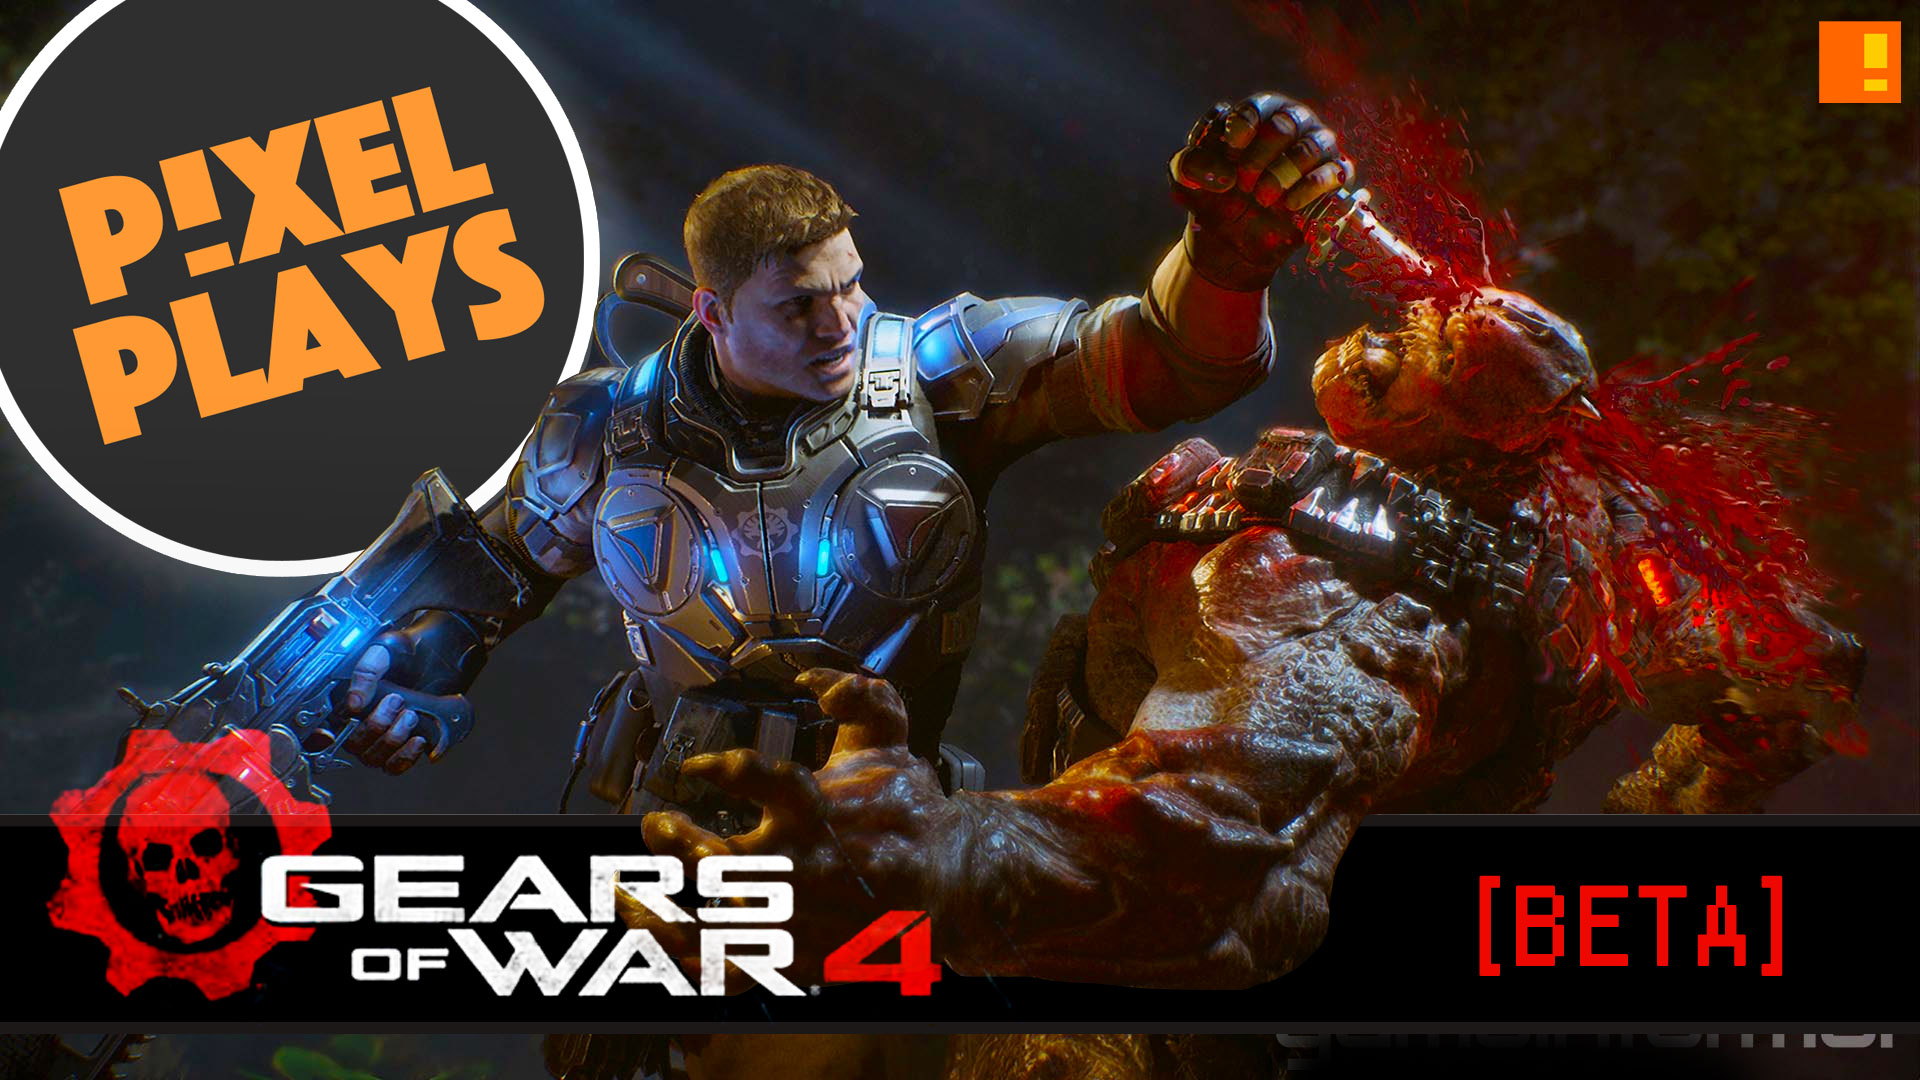 gears of war, beta, gears of war 4 beta, gears of war 4, gears 4, the coalition, epic games, let's play,pixel plays, the action pixel, amer iqbal, enterainment on tap, john rushton,